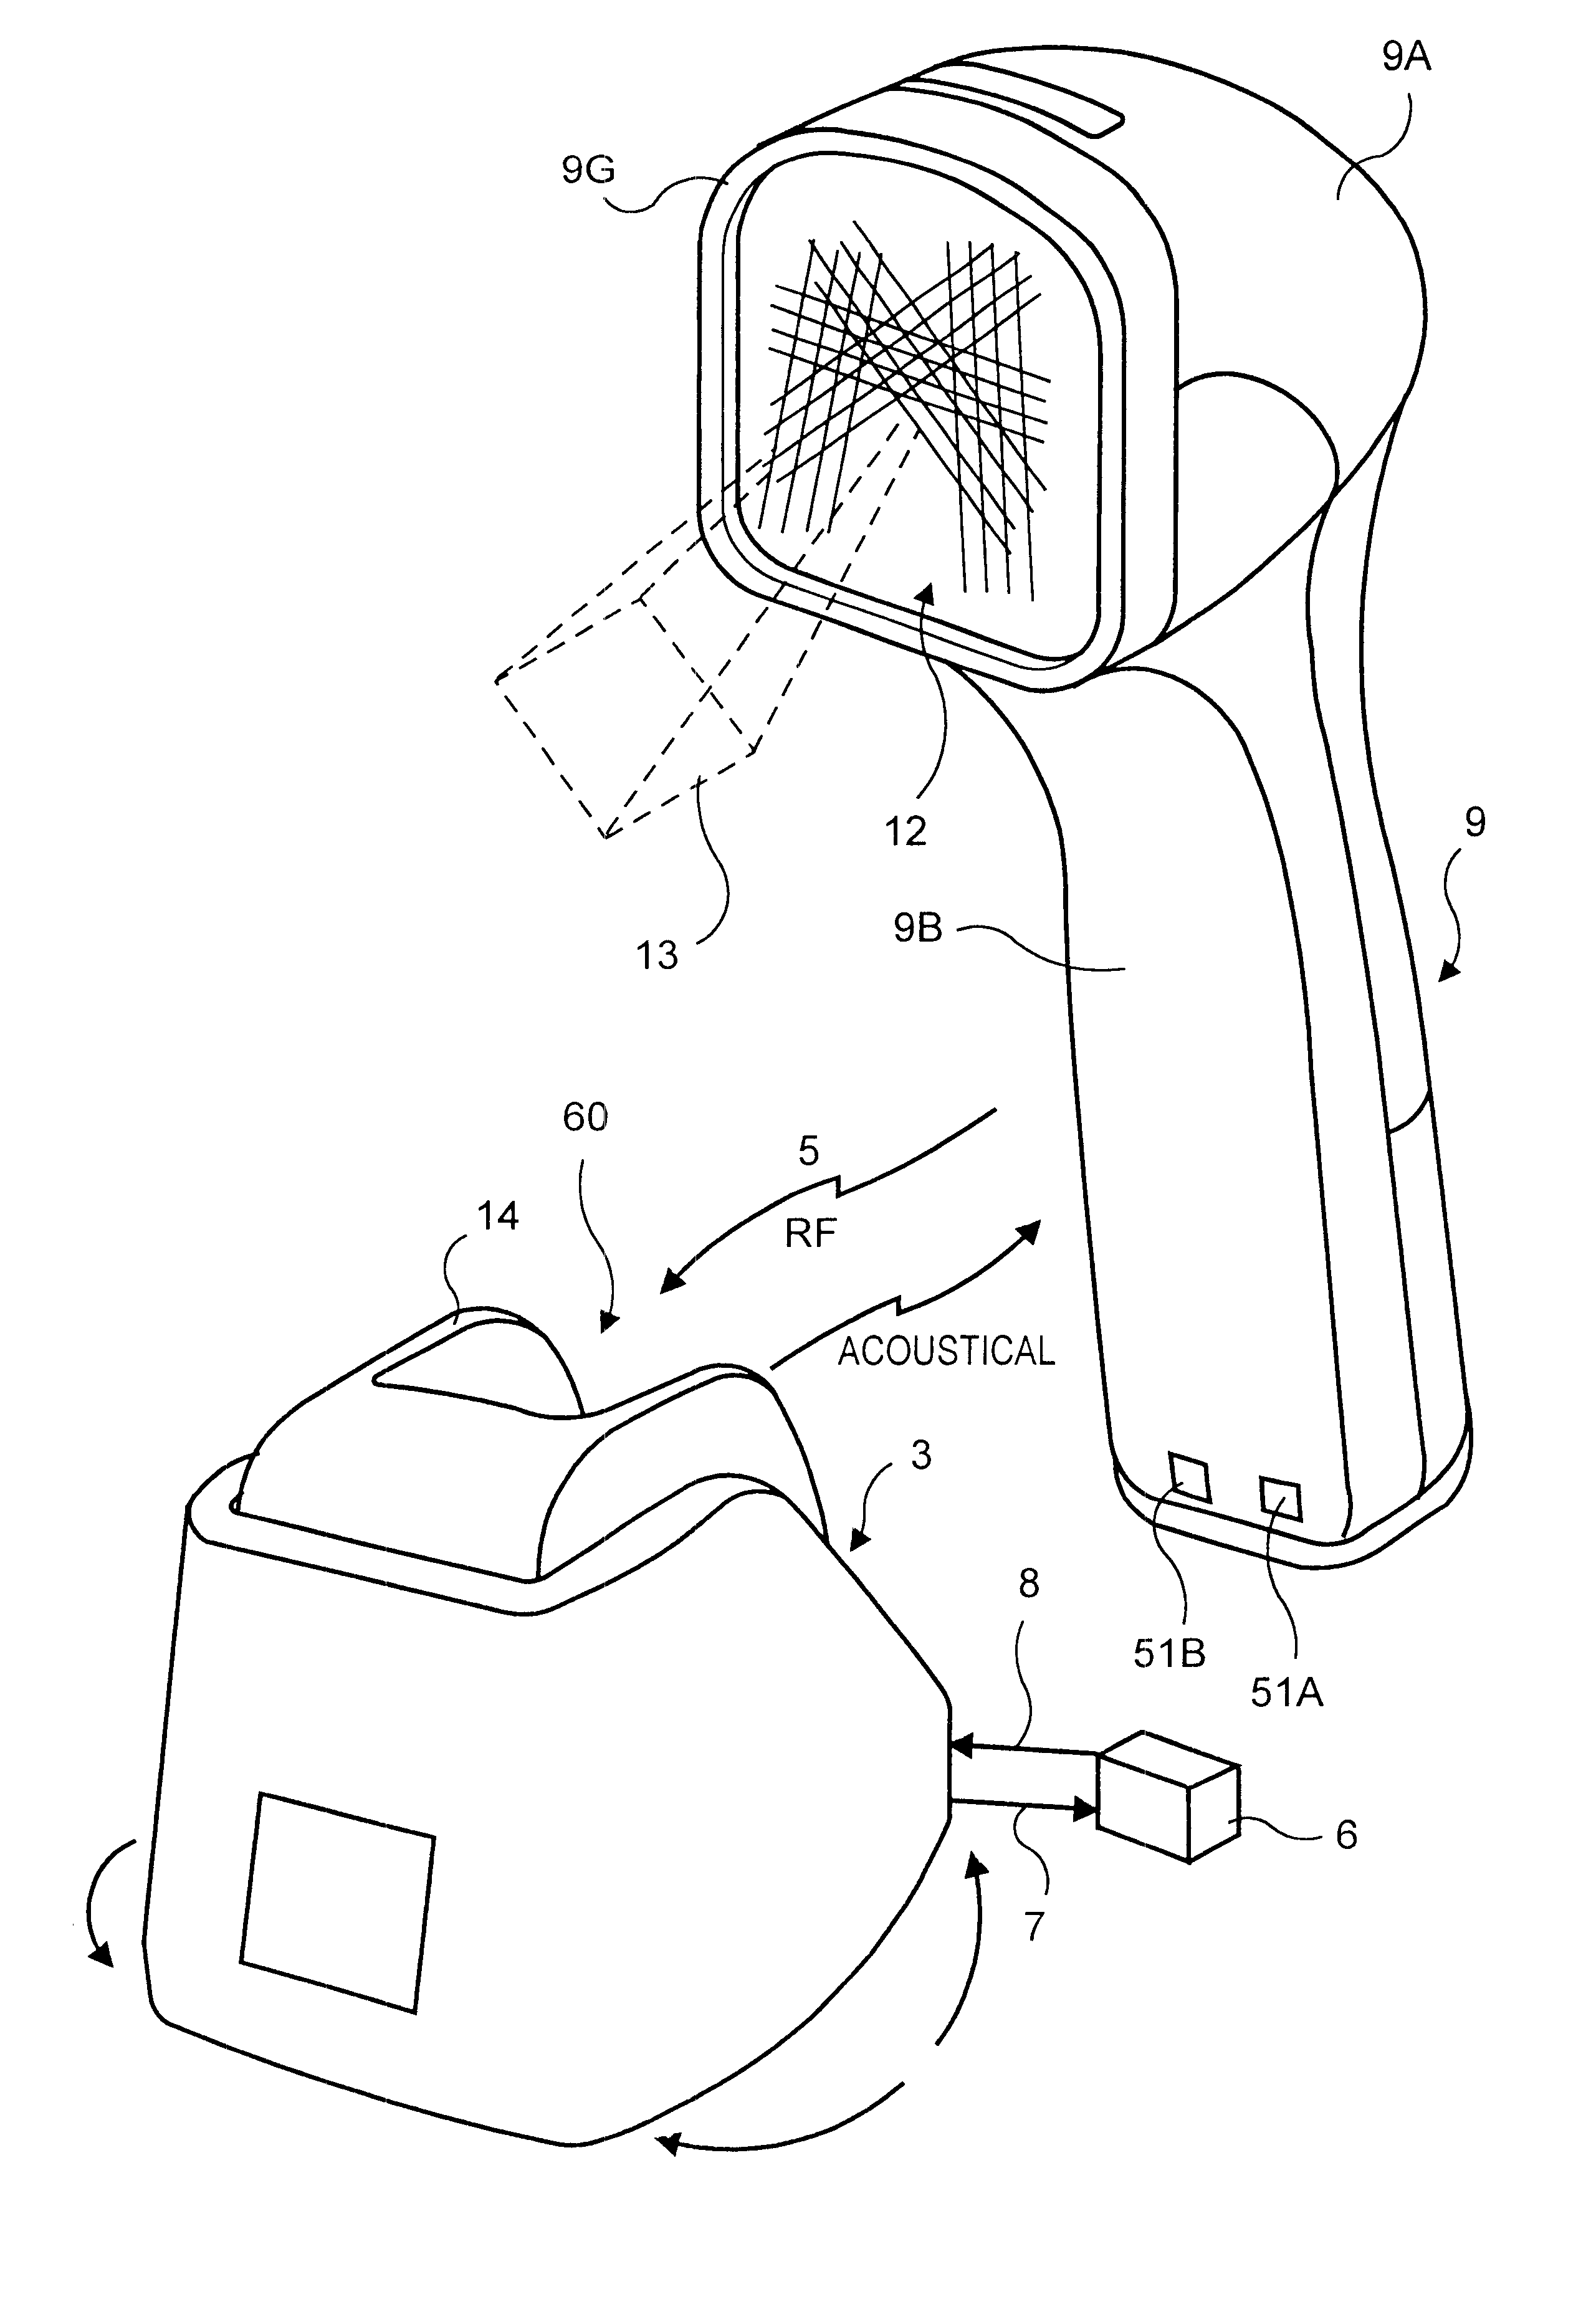 Automatic optical projection scanner for omni-directional reading of bar code symbols within a confined scanning volume